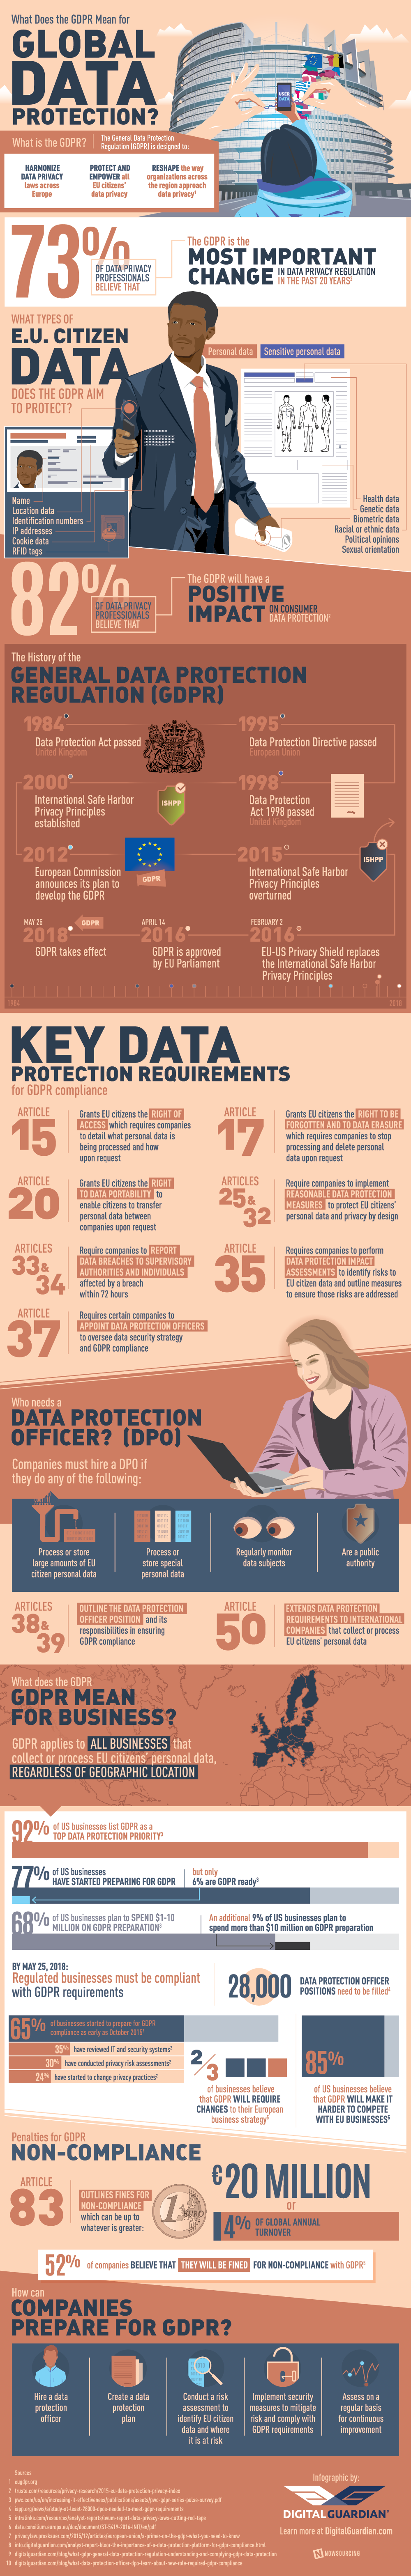 What Does the GDPR Mean for Global Data Protection? - #infographic